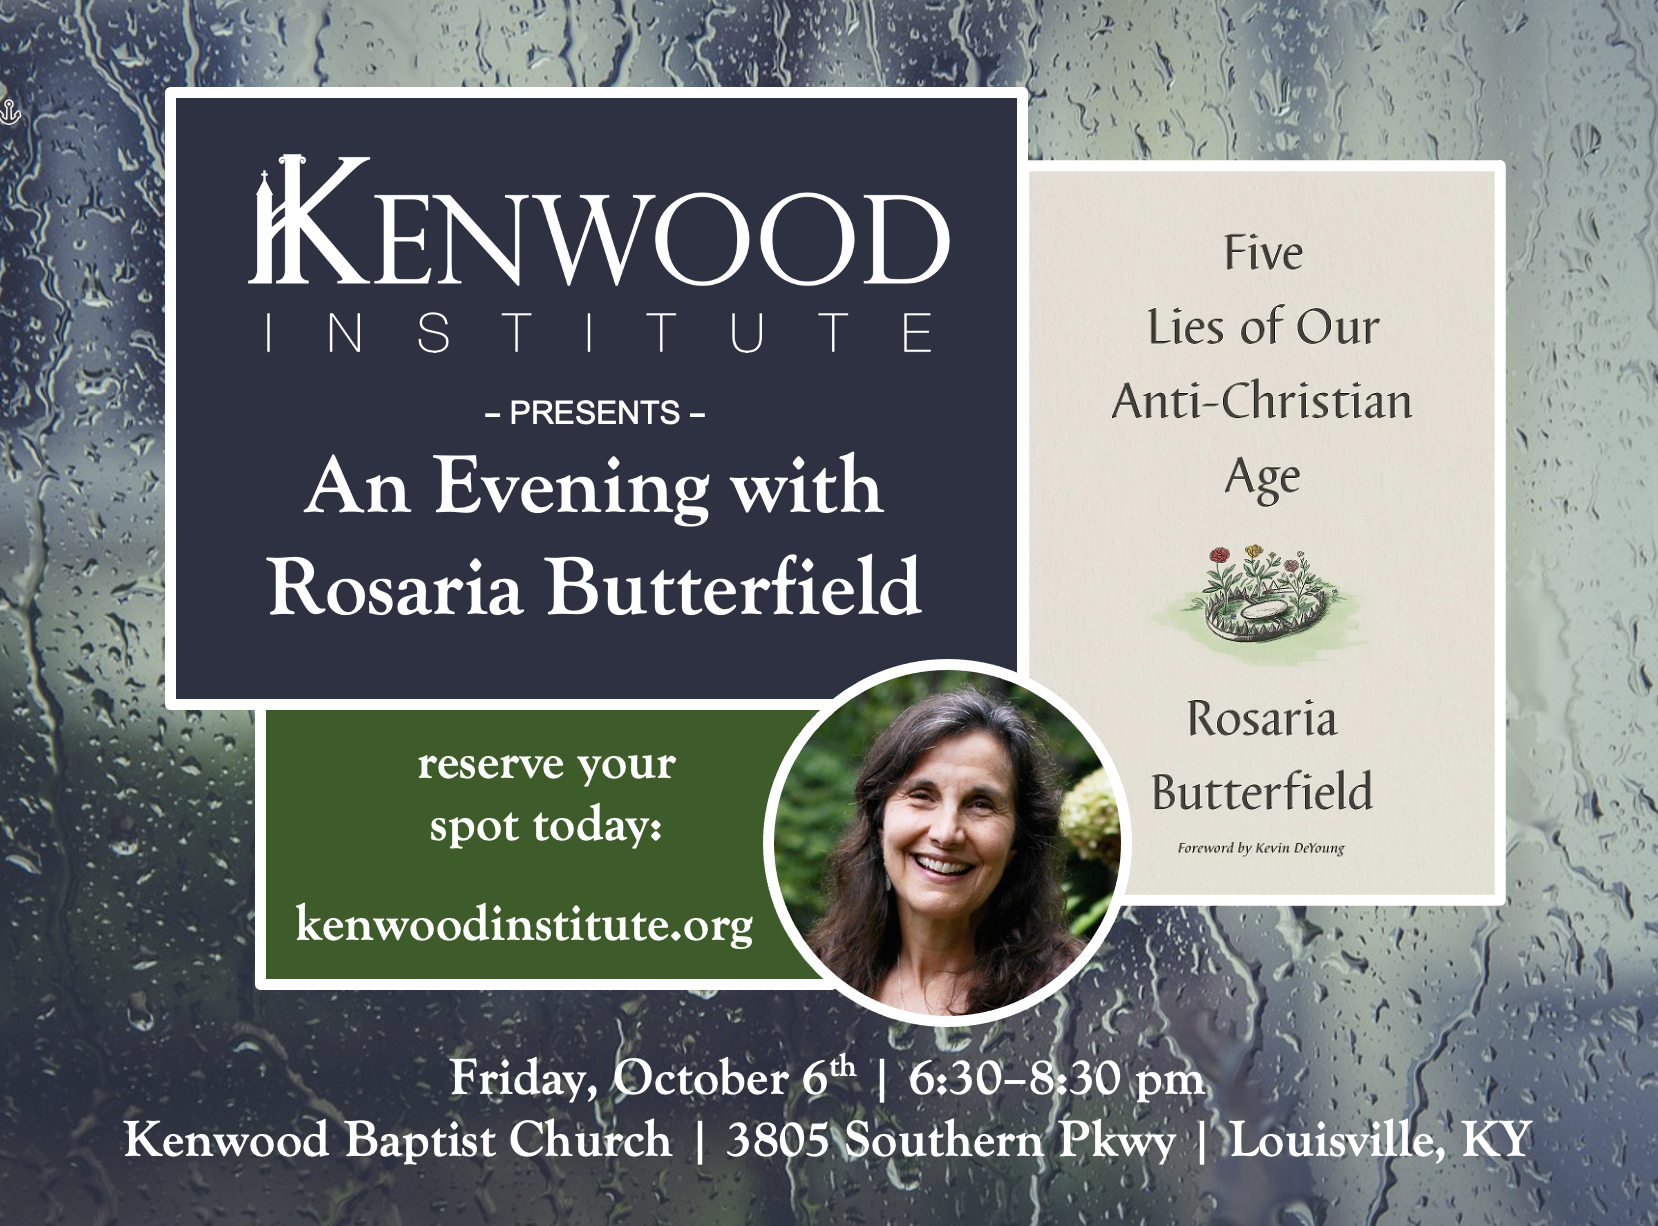 An Evening with Rosaria Butterfield | “Five Lies of Our Anti-Christian Age”